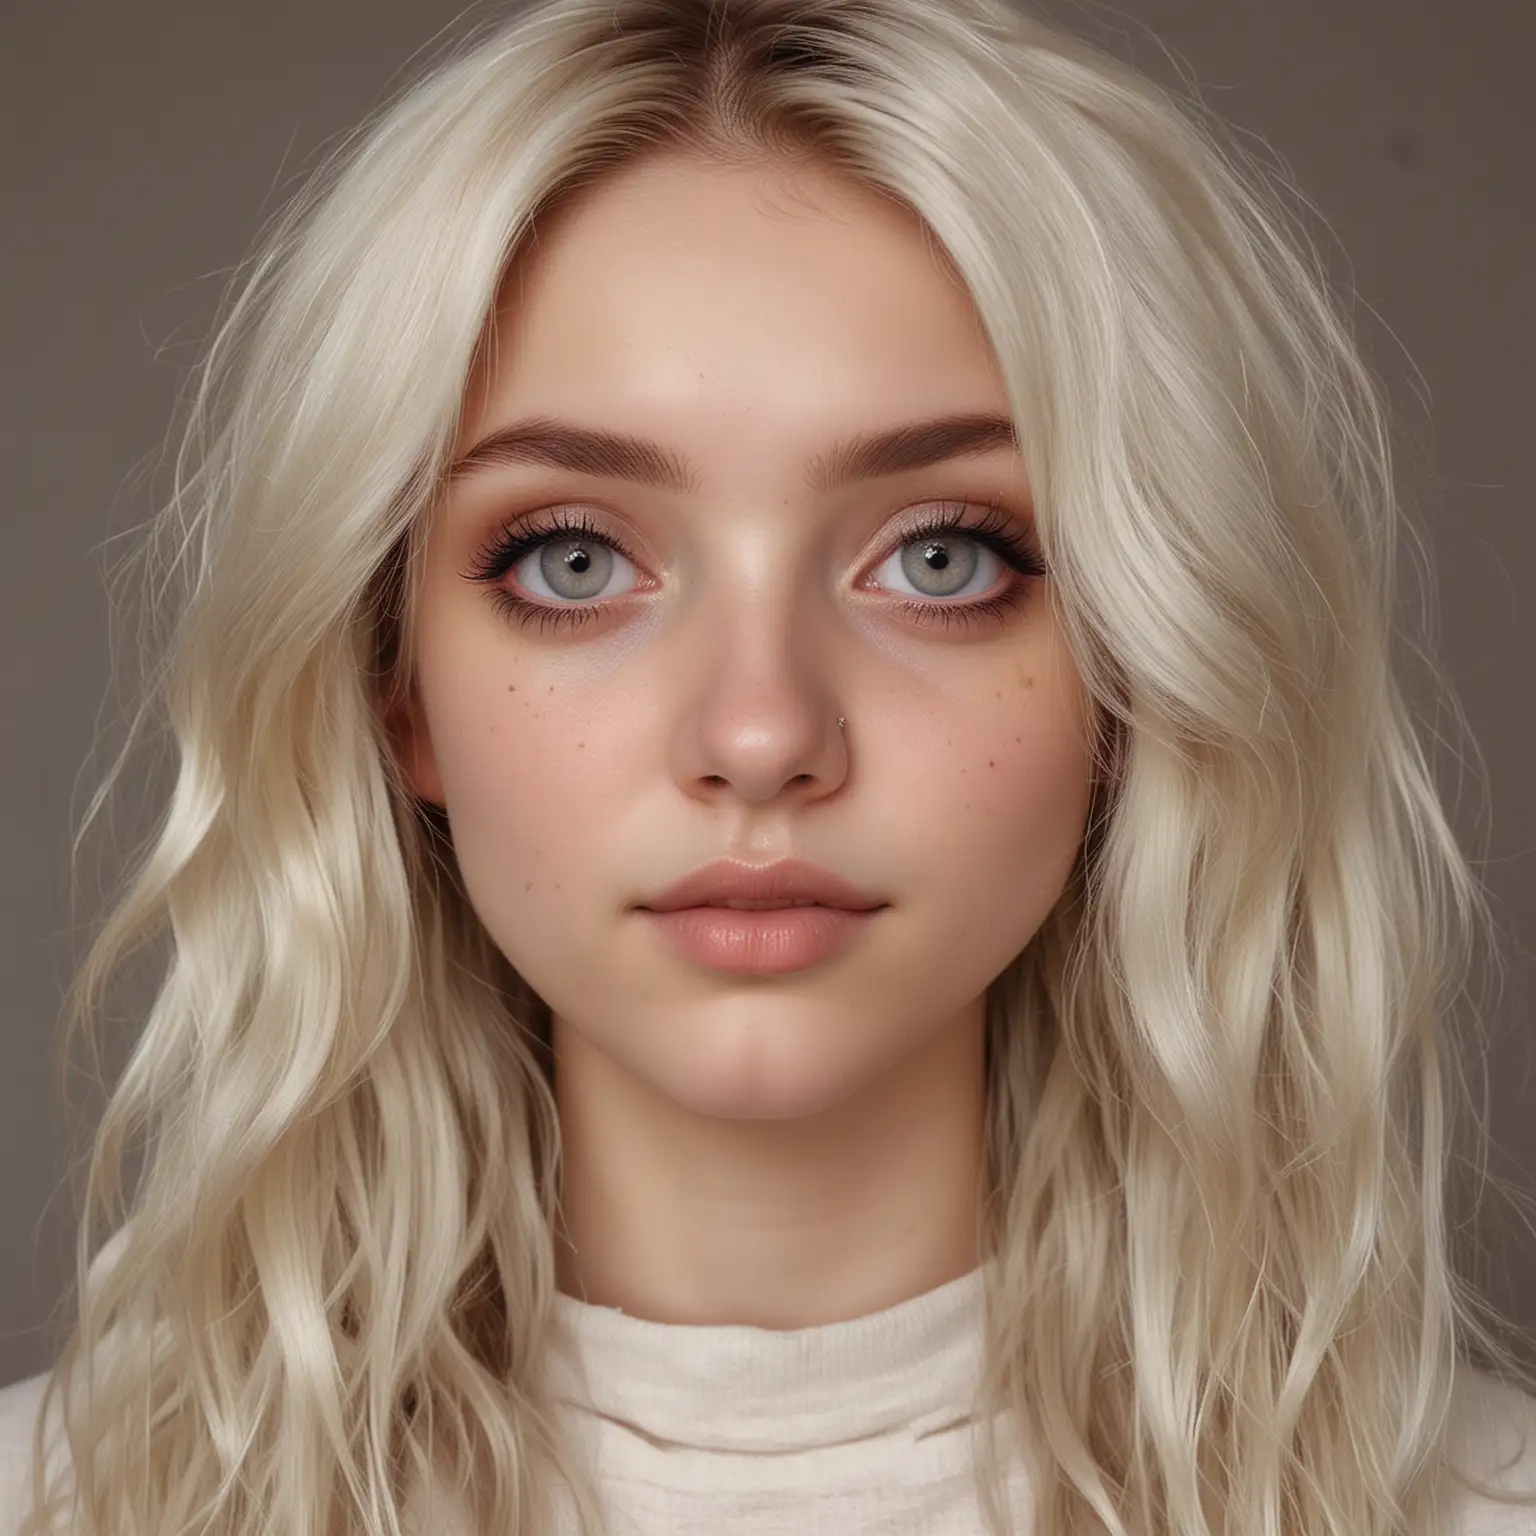 Platinum Blonde Woman with Silver Eye Piercings and Rosy Cheeks